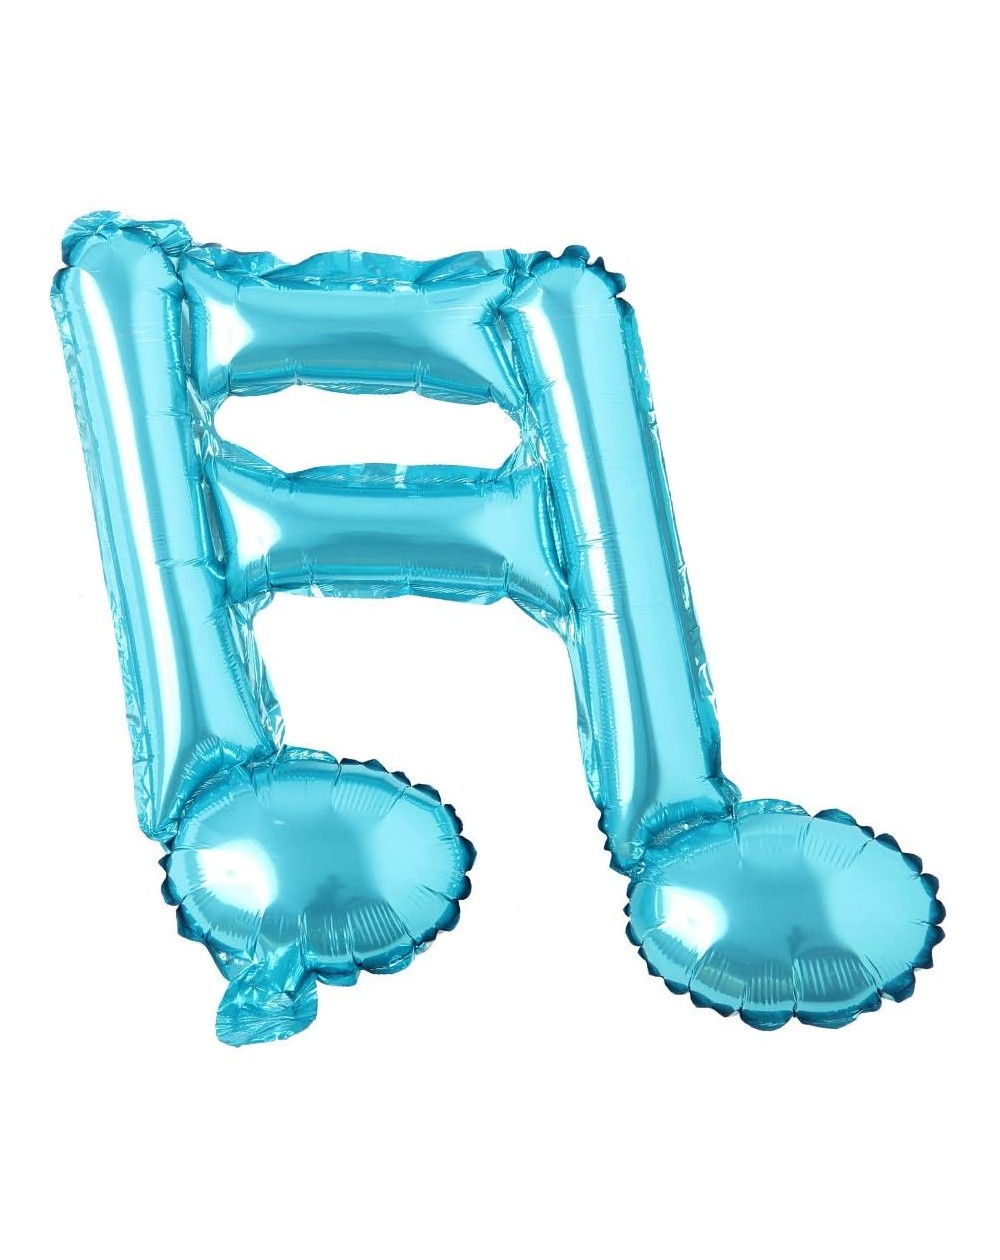 Balloons Musical Notes foil Mylar Balloons Wedding Birthday Party Supplies Inflatable Wedding Decorations Supplies Helium Bal...